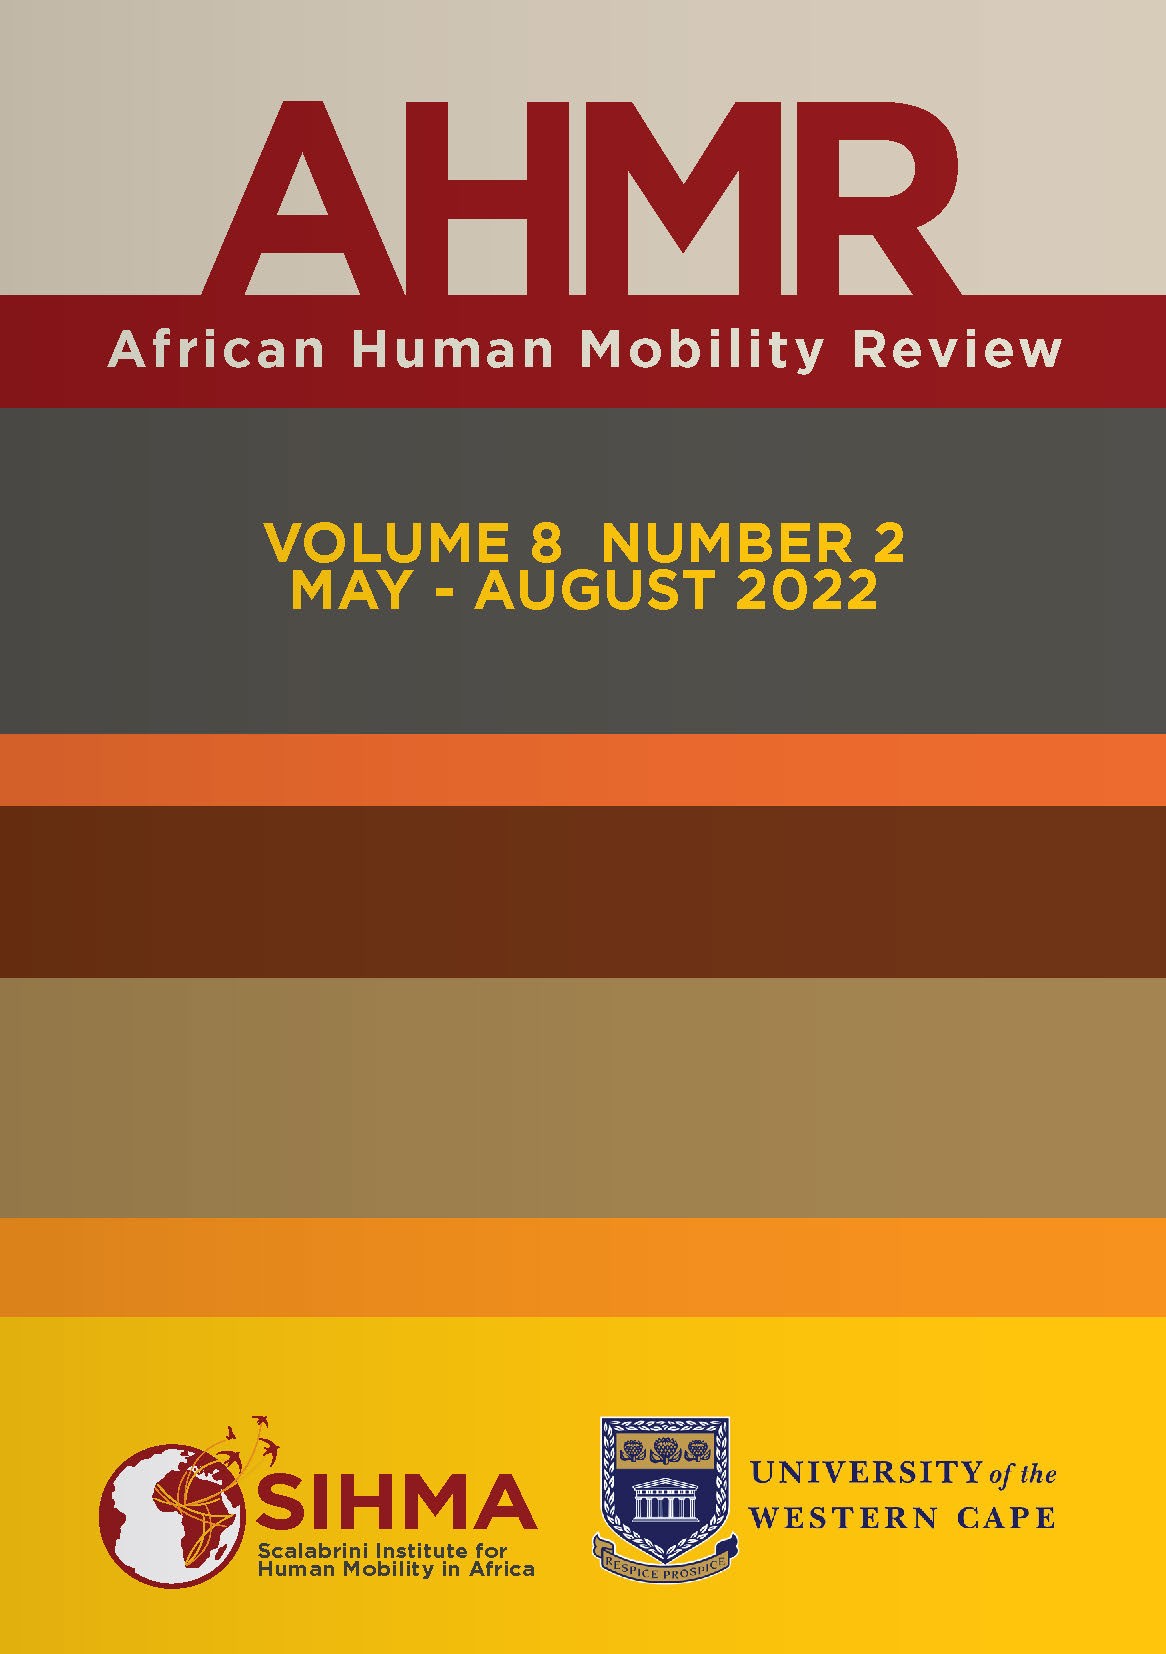 https://www.sihma.org.za/photos/shares/AHMR volume 8 number 2 May-Aug 2022 COVER.jpg